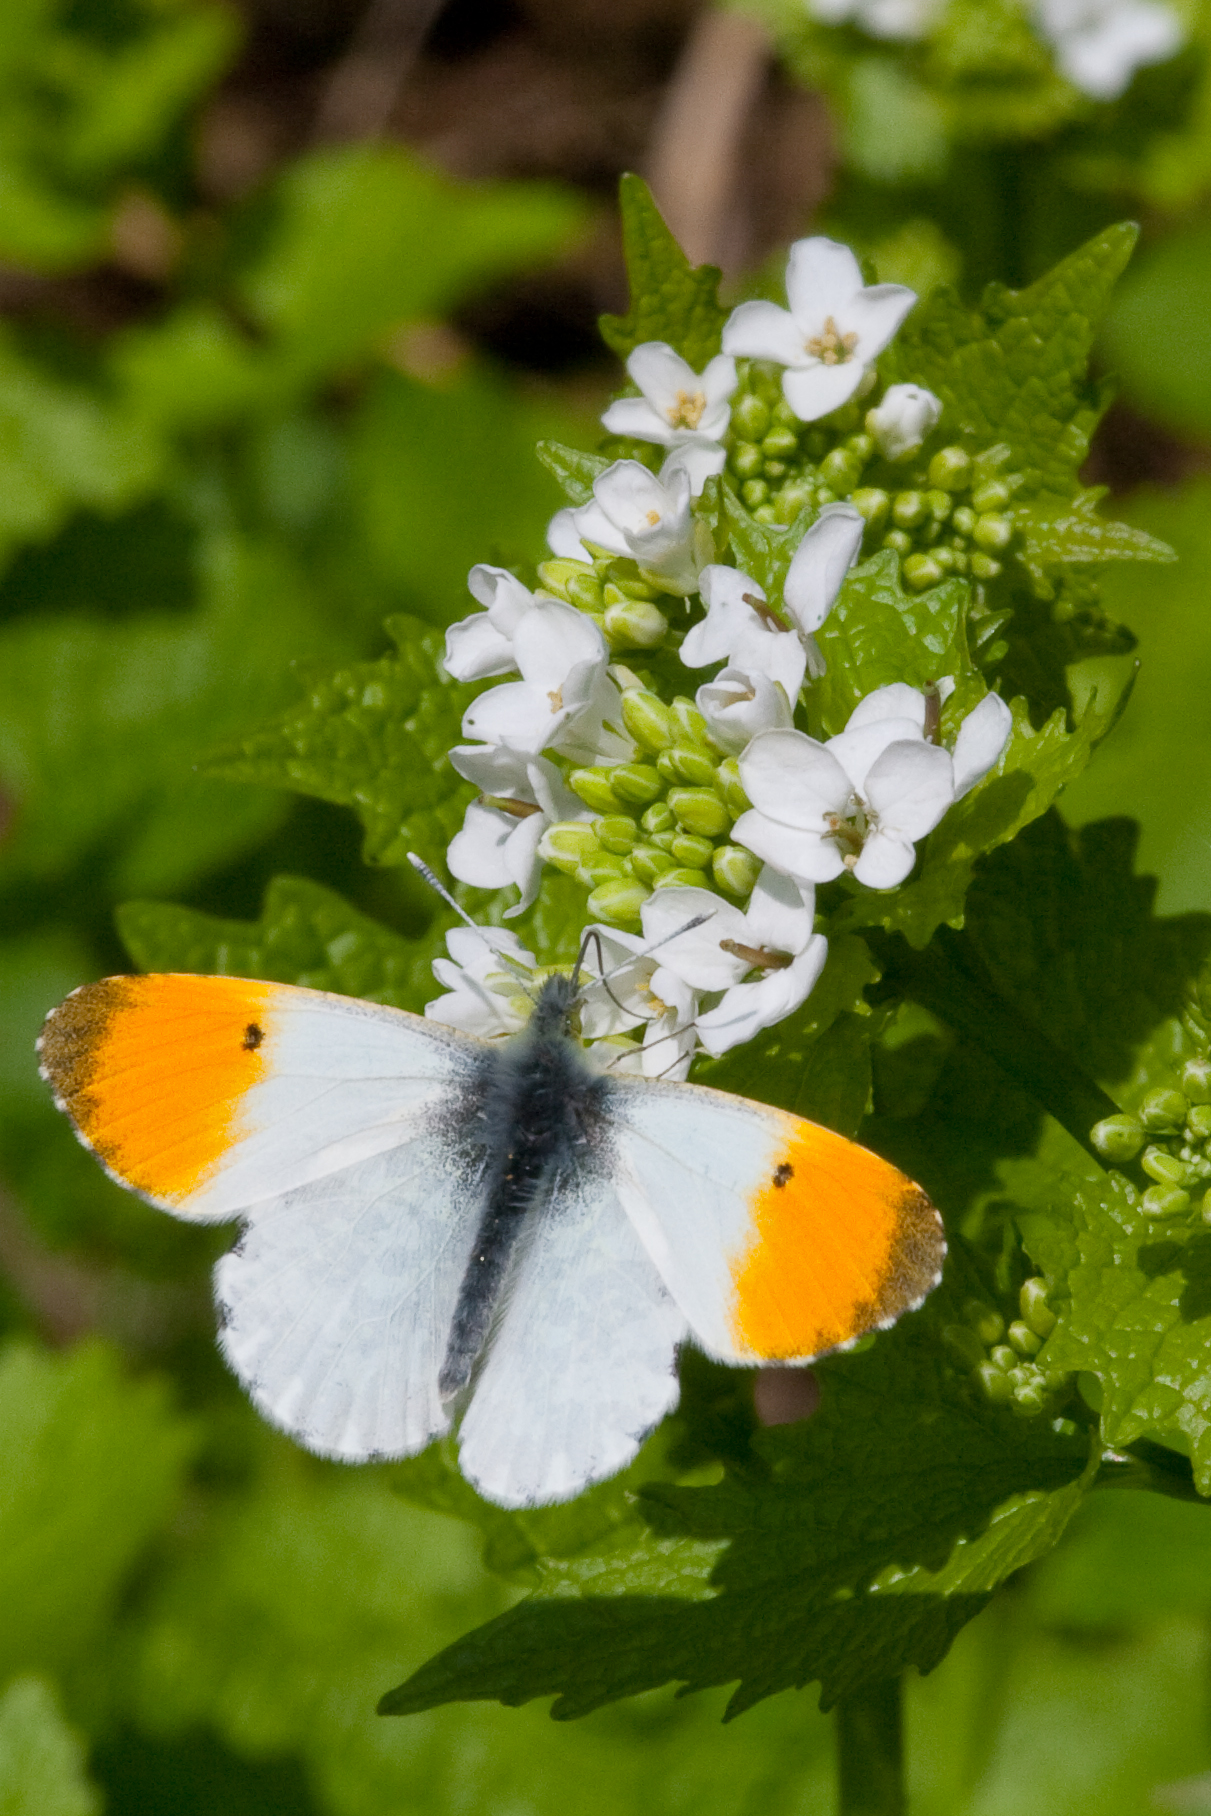 Image: The orange-tip butterfly occurs from the southern tip of England to northern parts of Scotland, and is often seen in gardens. This species expanded its distribution in response to climate warming from the 1970s to the 1990s, however in recent years it has suffered from negative abundance trends and has failed to expand its distribution. Credit: Peter Eeles/Butterfly Conservation